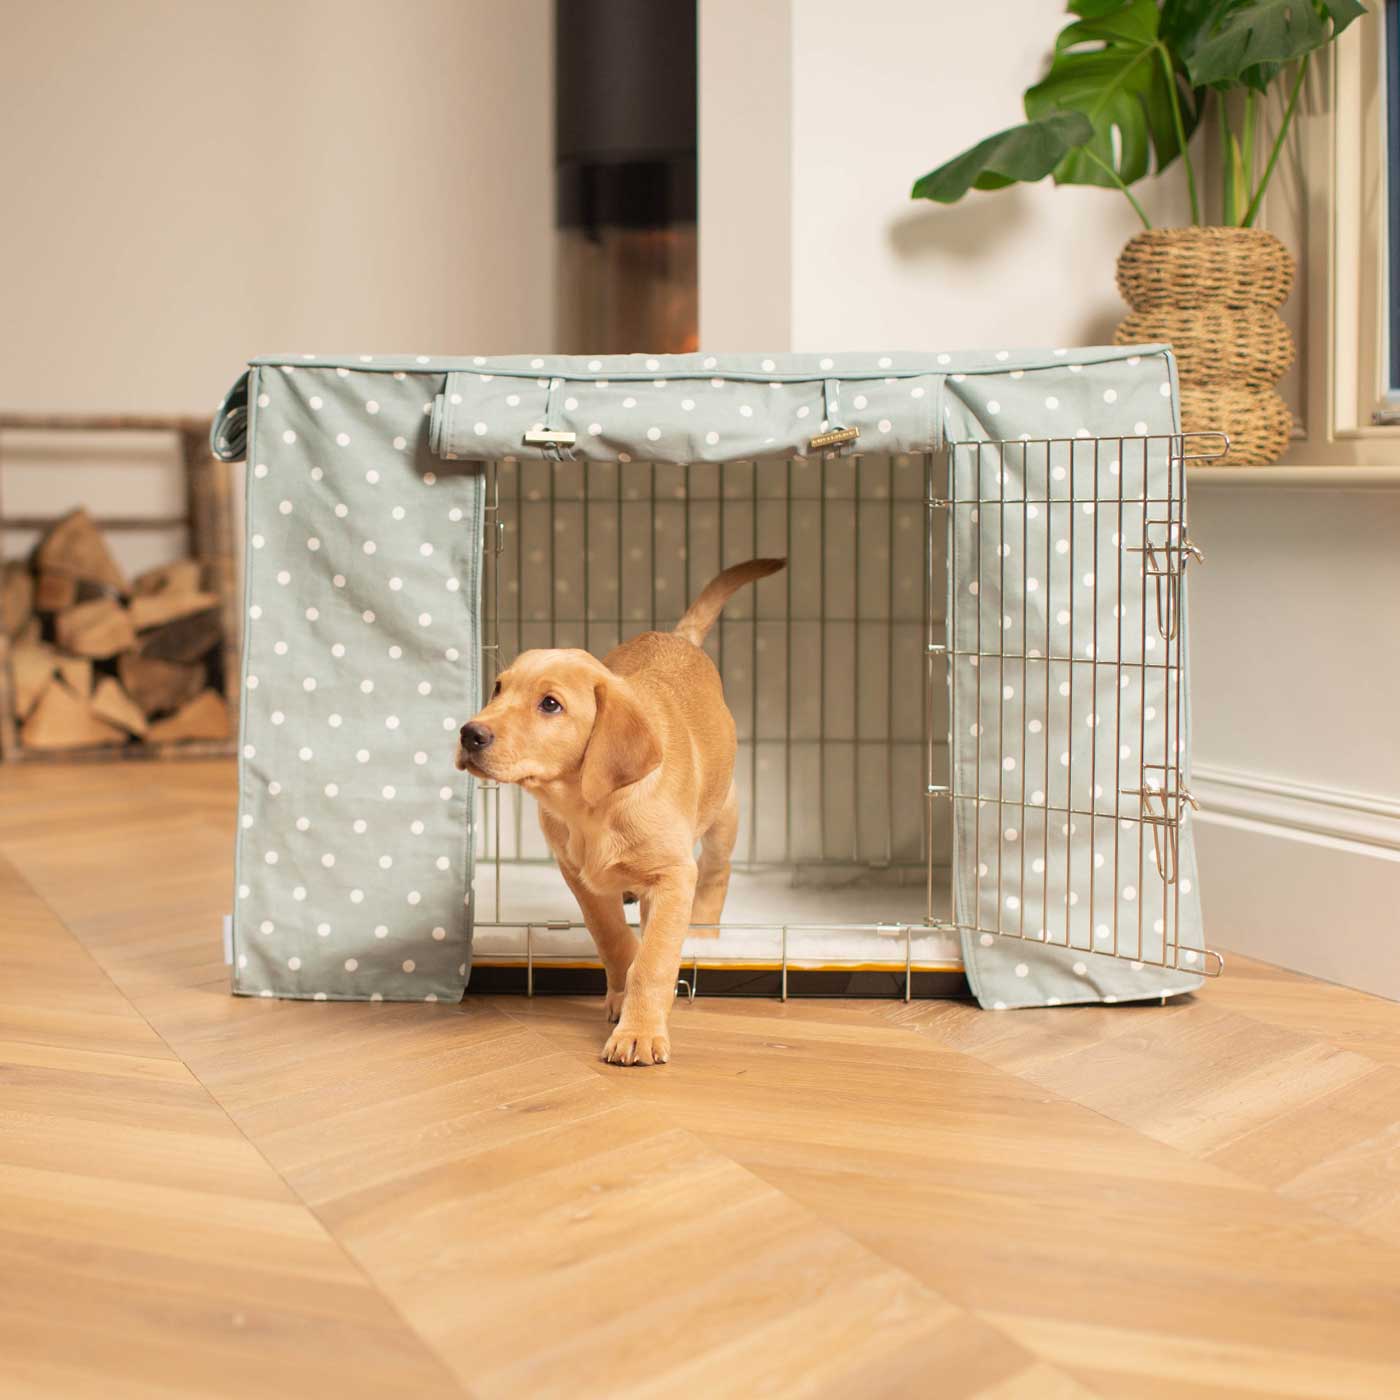 Luxury Silver Dog Cage  With Cage Cover, in Duck Egg Spot. The Perfect Dog Crate For The Ultimate Naptime, Available Now to Personalize at Lords & Labradors US